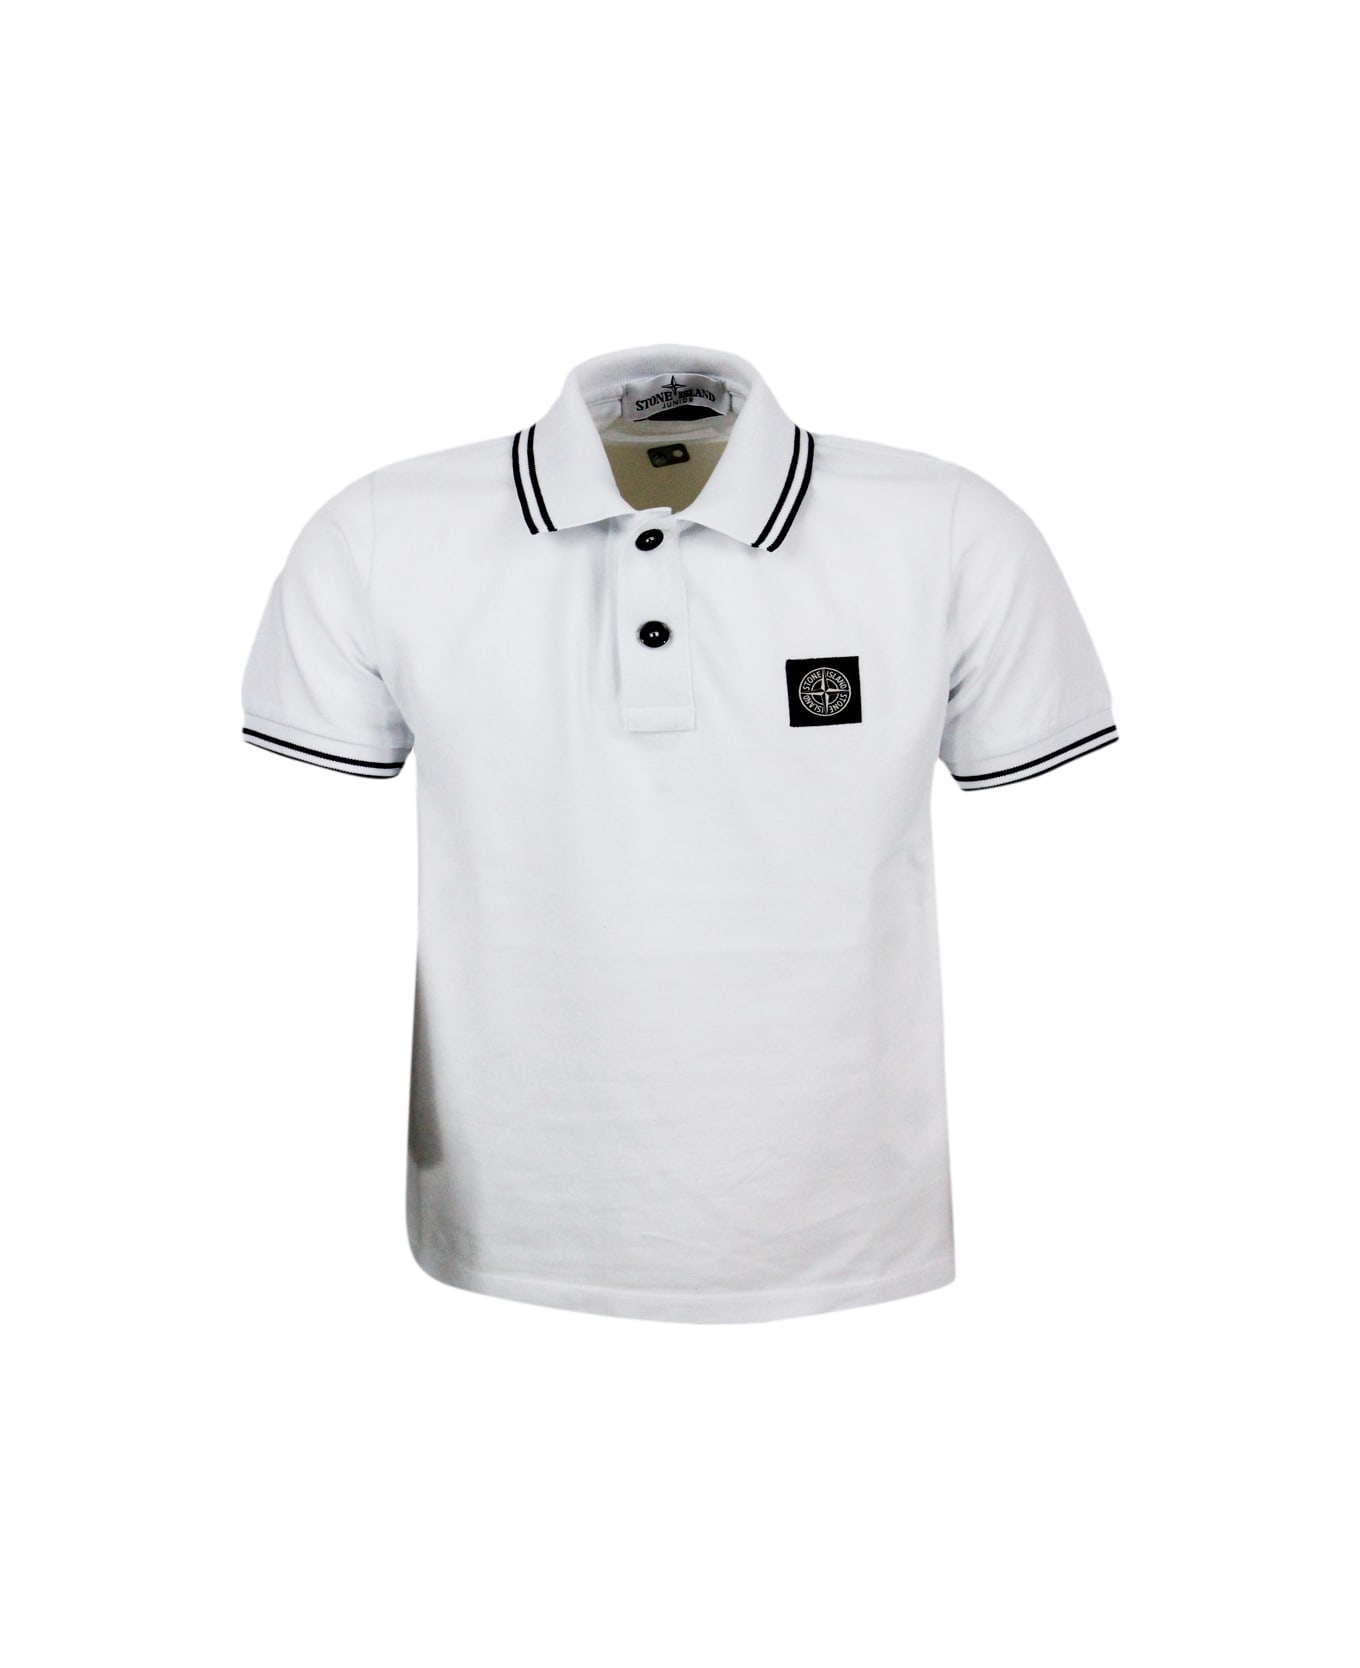 Stone Island Short-sleeved Pique Cotton Polo Shirt With Contrasting Color Profiles On The Collar And Sleeve. Logo On The Chest - White